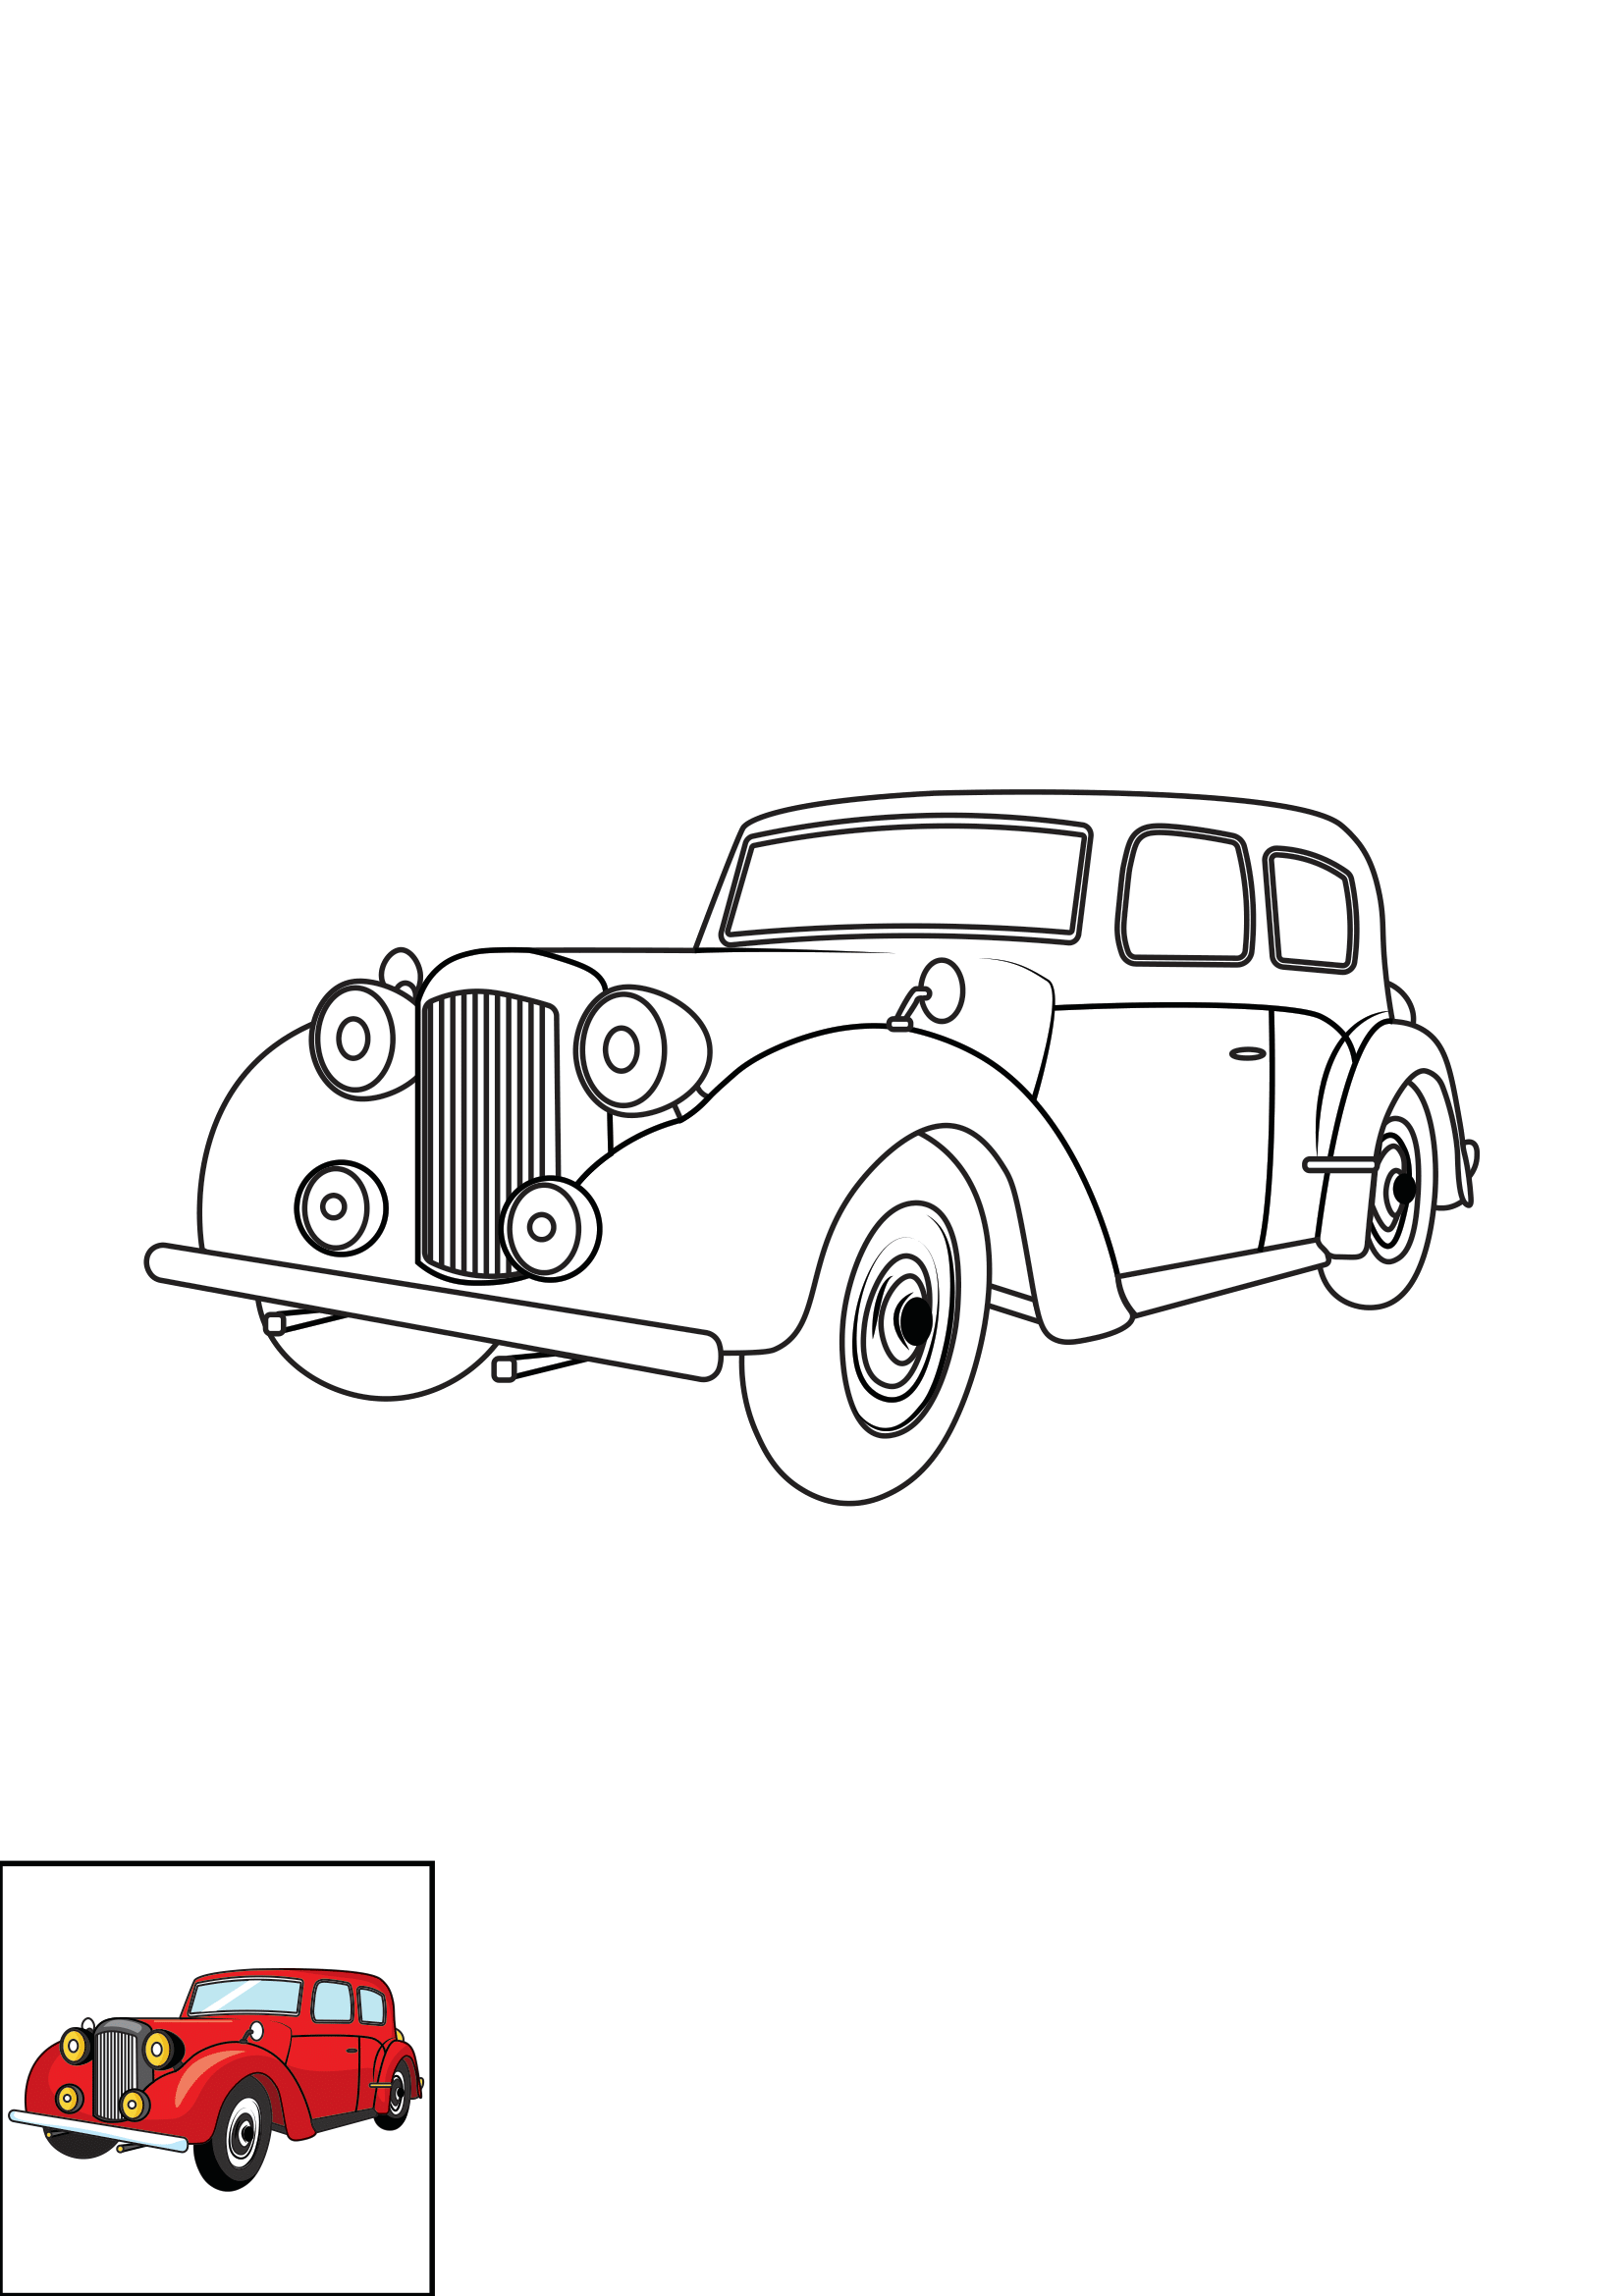 How to Draw A Vintage Car Step by Step Printable Color